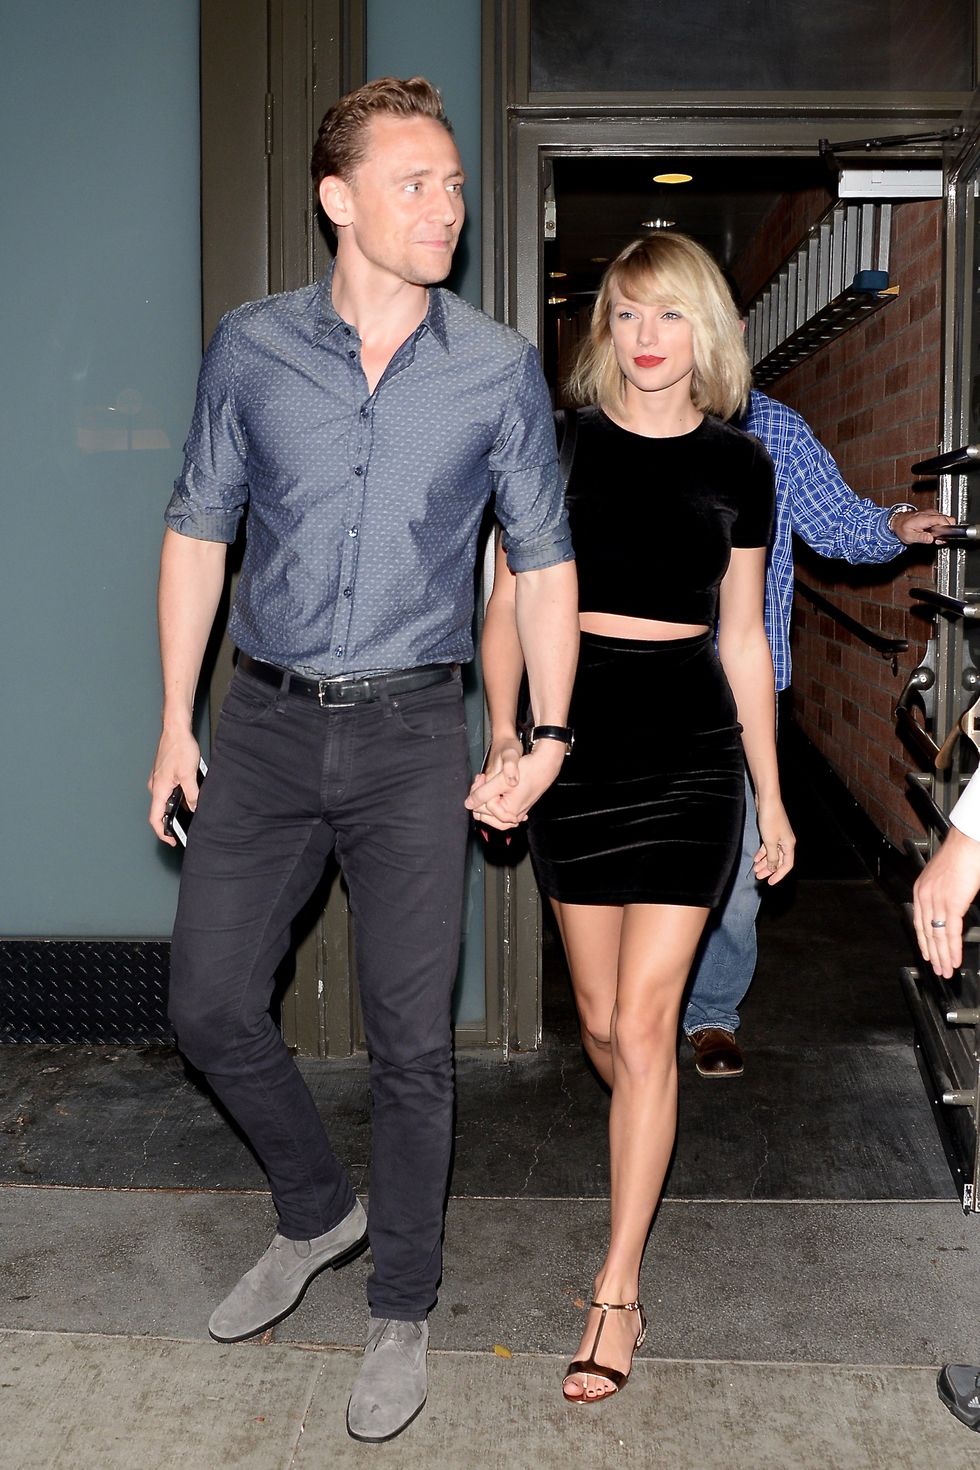 <p>Cobb notes that Taylor has a "confident sexy stride" in this photo, showing that she's at ease—despite the swarm of paparazzi waiting for her and Tom. "It's a relaxed, comfortable handhold," Cobb says. "They're very comfortable, while in other pictures their hands are tighter."  Considering this photo was snapped after <a href="http://www.marieclaire.com/celebrity/a21589/kim-kardashian-snapchat-taylor-swift-famous-kanye-west/" target="_blank">Kim Kardashian dragged Taylor through the Snapchat mud</a>, this is nice to hear.</p><p><br></p><p>So, what's Cobb's overall impression of Taylor and Tom's relationship based on their body language?  "This is a couple who are attracted to each other," she says. "They had some very intimate moments; there's a level of closeness and attraction between them. I think they're really into each other." </p><p><br></p><p>Boom. There you have it.</p>